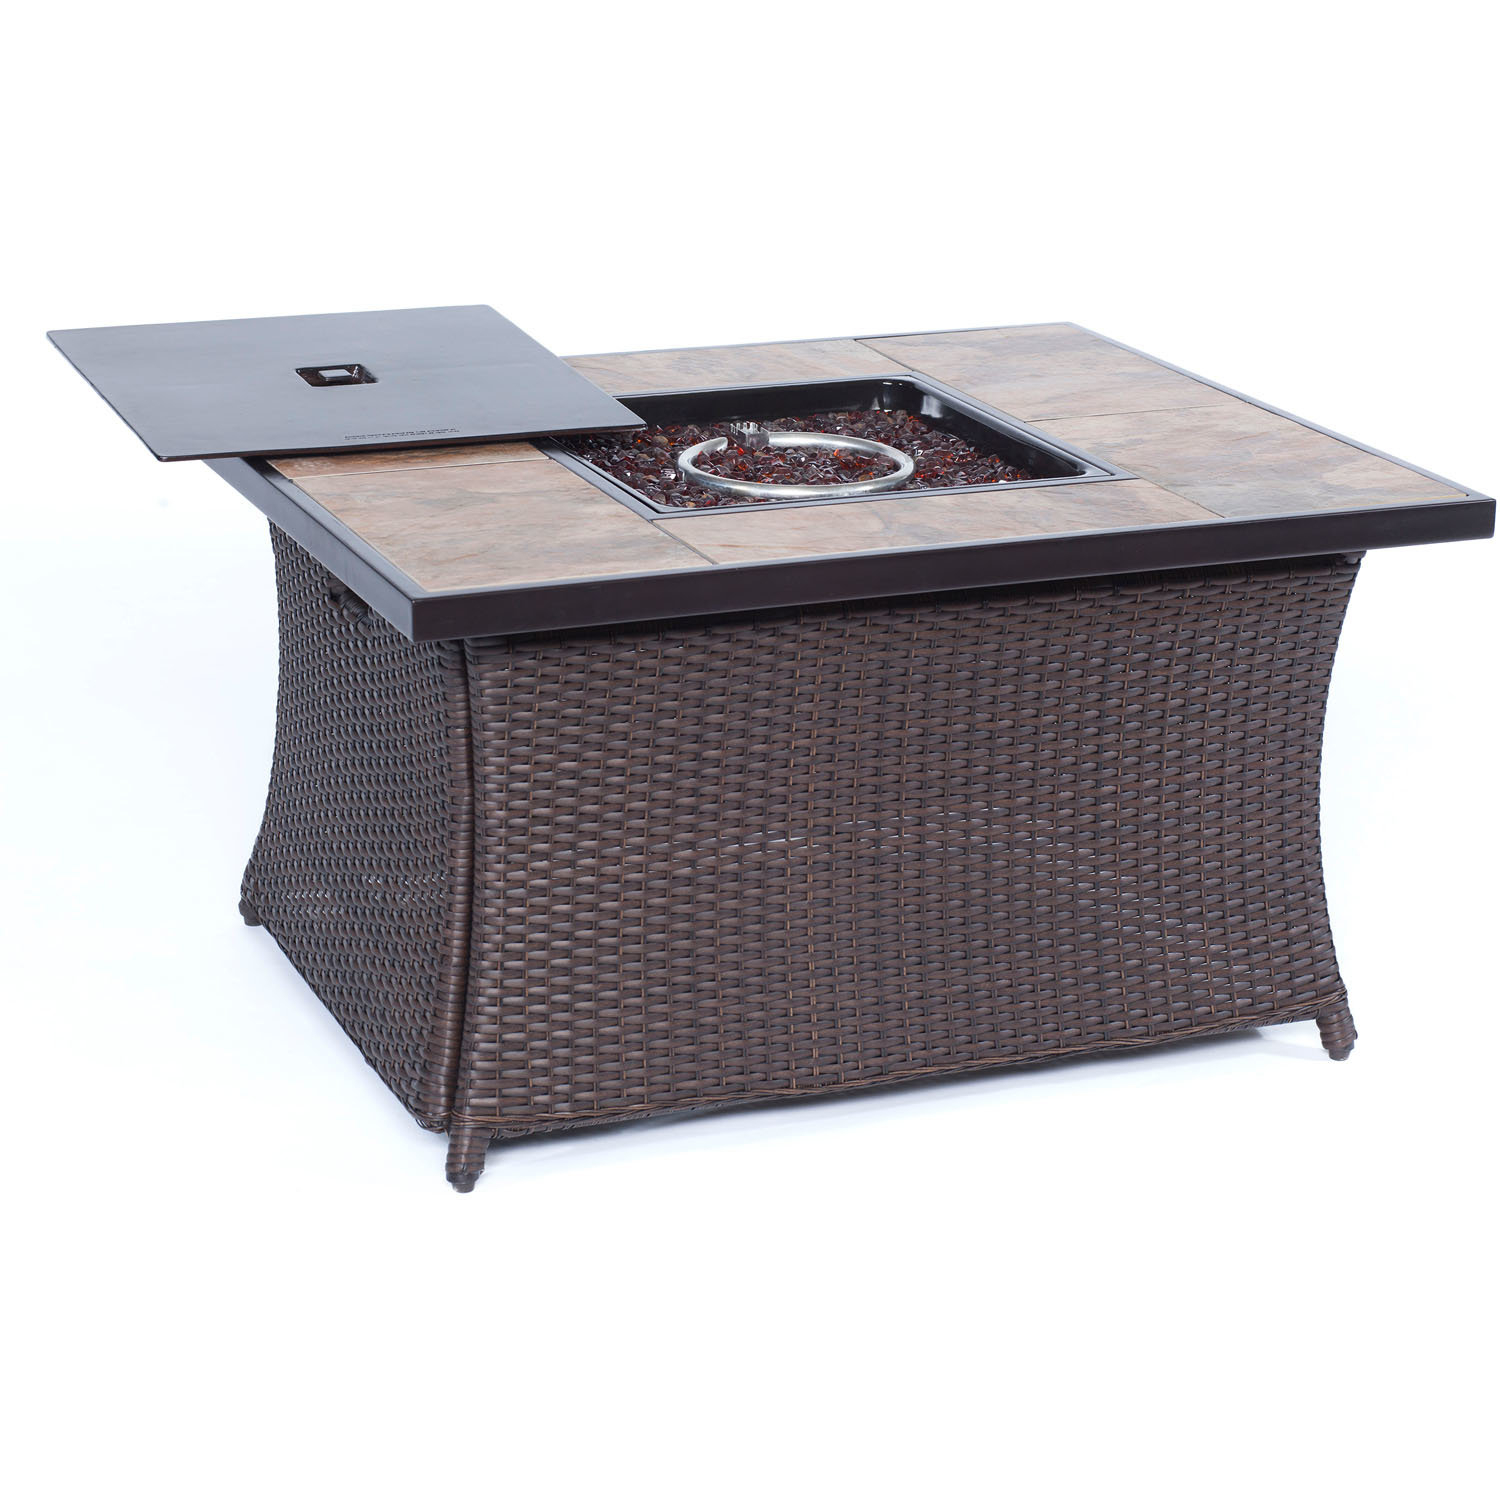 Hanover Wicker Propane Fire Pit Table Wayfair intended for dimensions 1500 X 1500